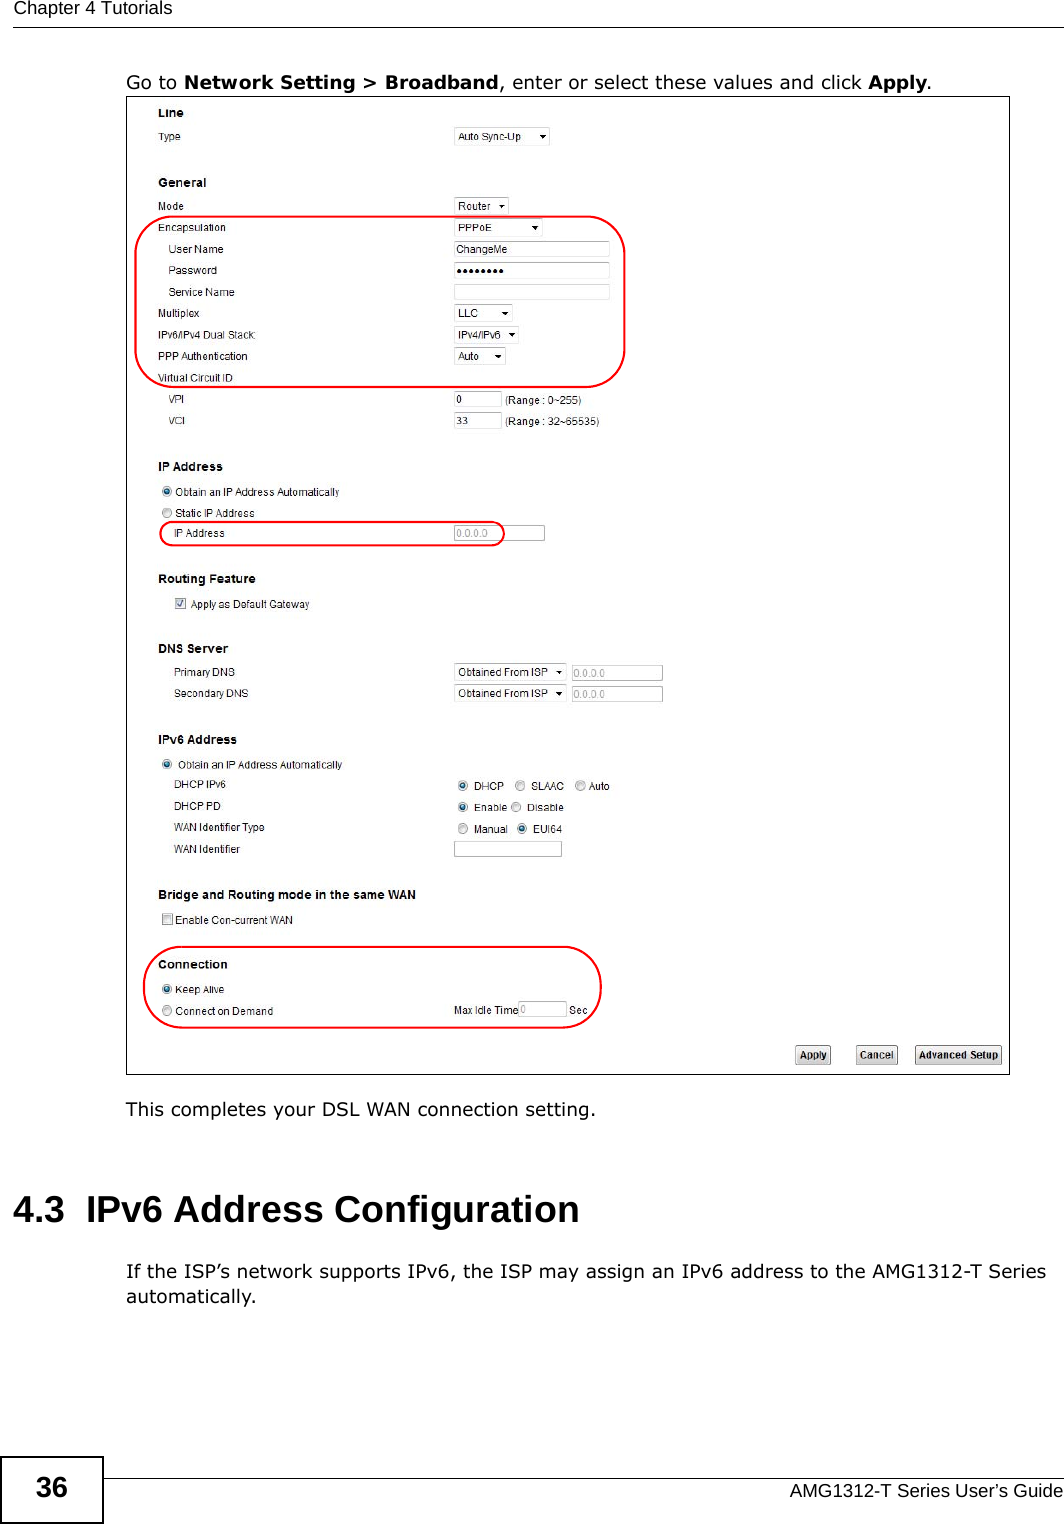 Chapter 4 TutorialsAMG1312-T Series User’s Guide36Go to Network Setting &gt; Broadband, enter or select these values and click Apply.This completes your DSL WAN connection setting. 4.3  IPv6 Address ConfigurationIf the ISP’s network supports IPv6, the ISP may assign an IPv6 address to the AMG1312-T Series automatically.